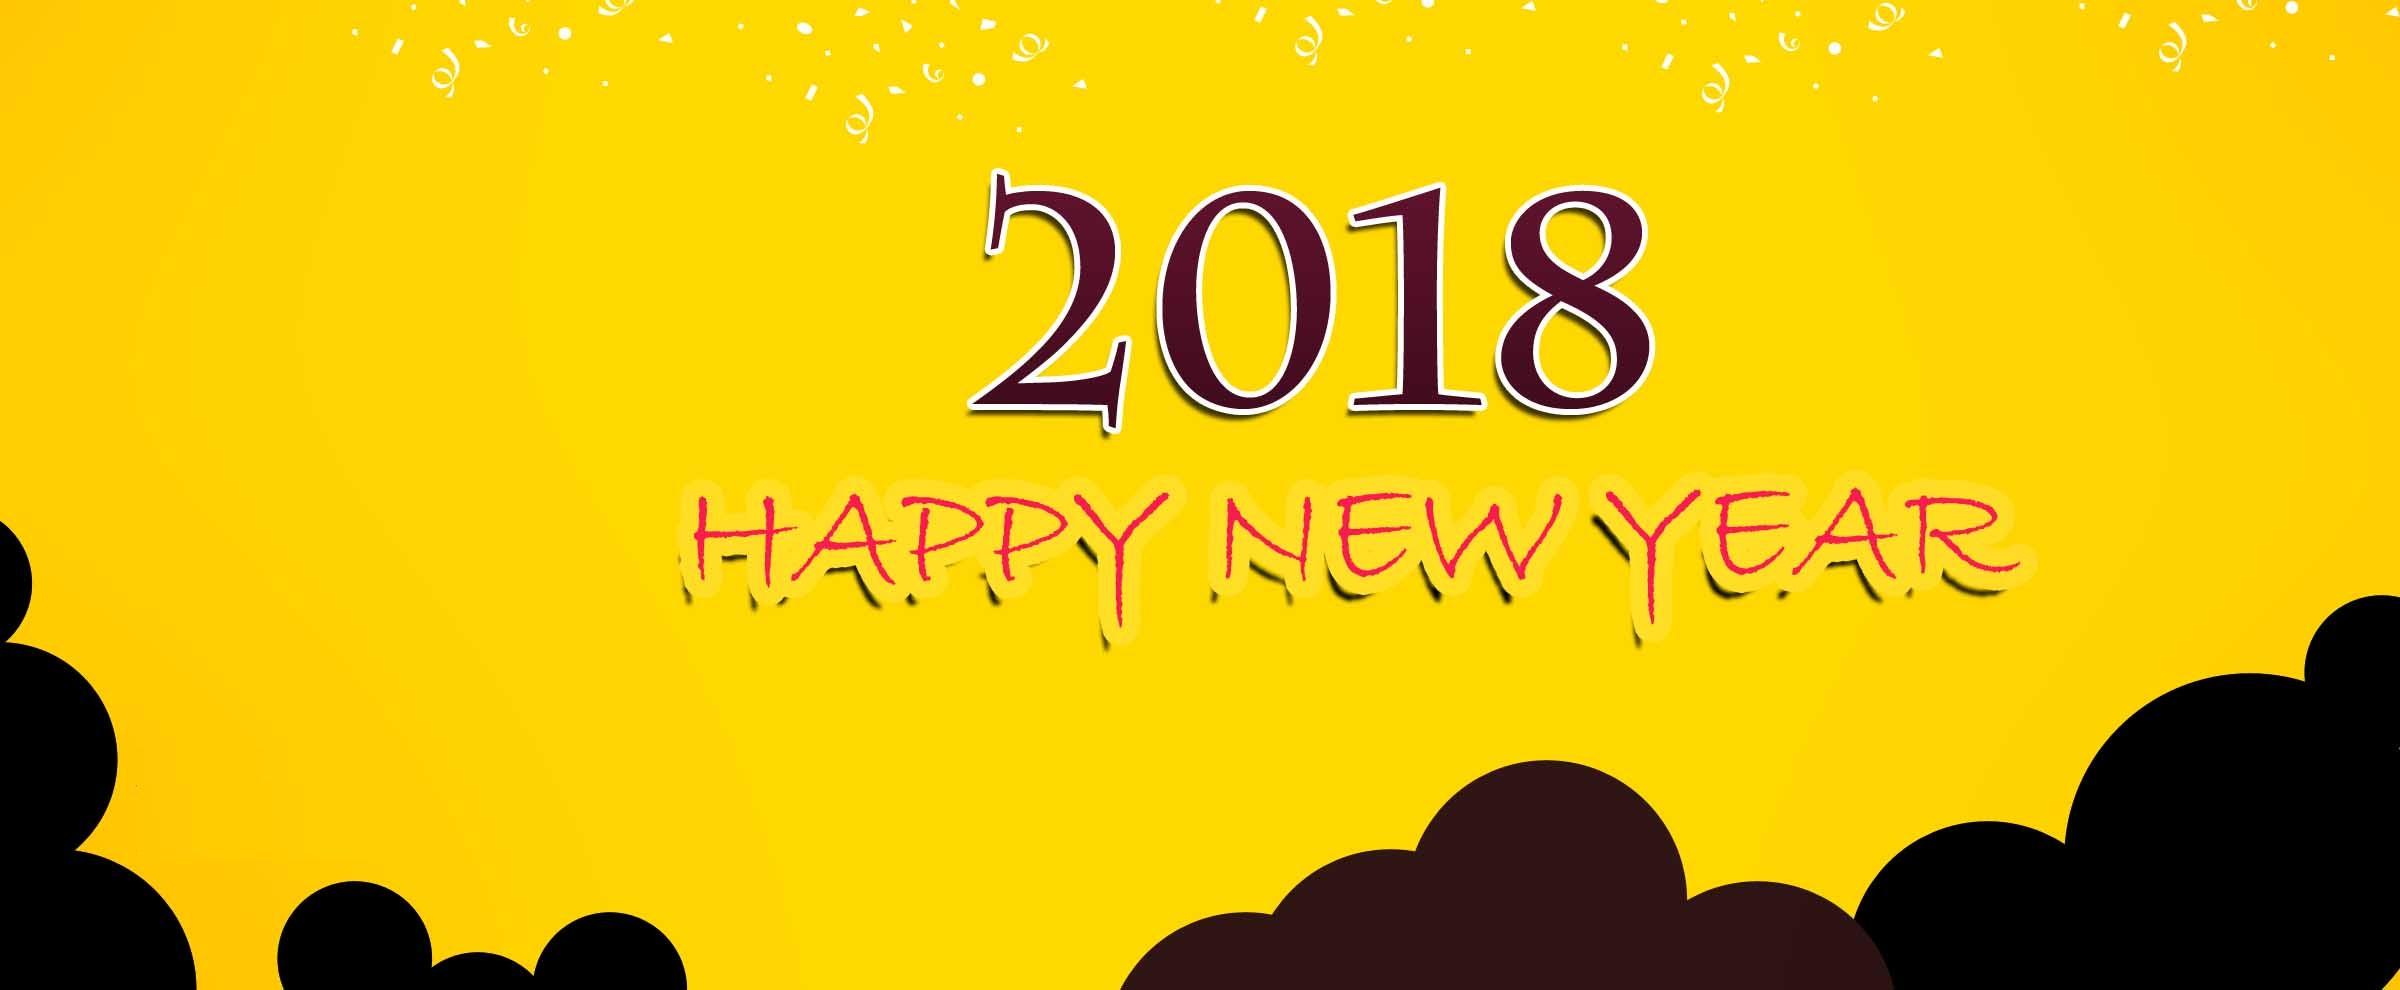 Latest Facebook Cover Pics Archives New Year 2018 HD Wallpaper